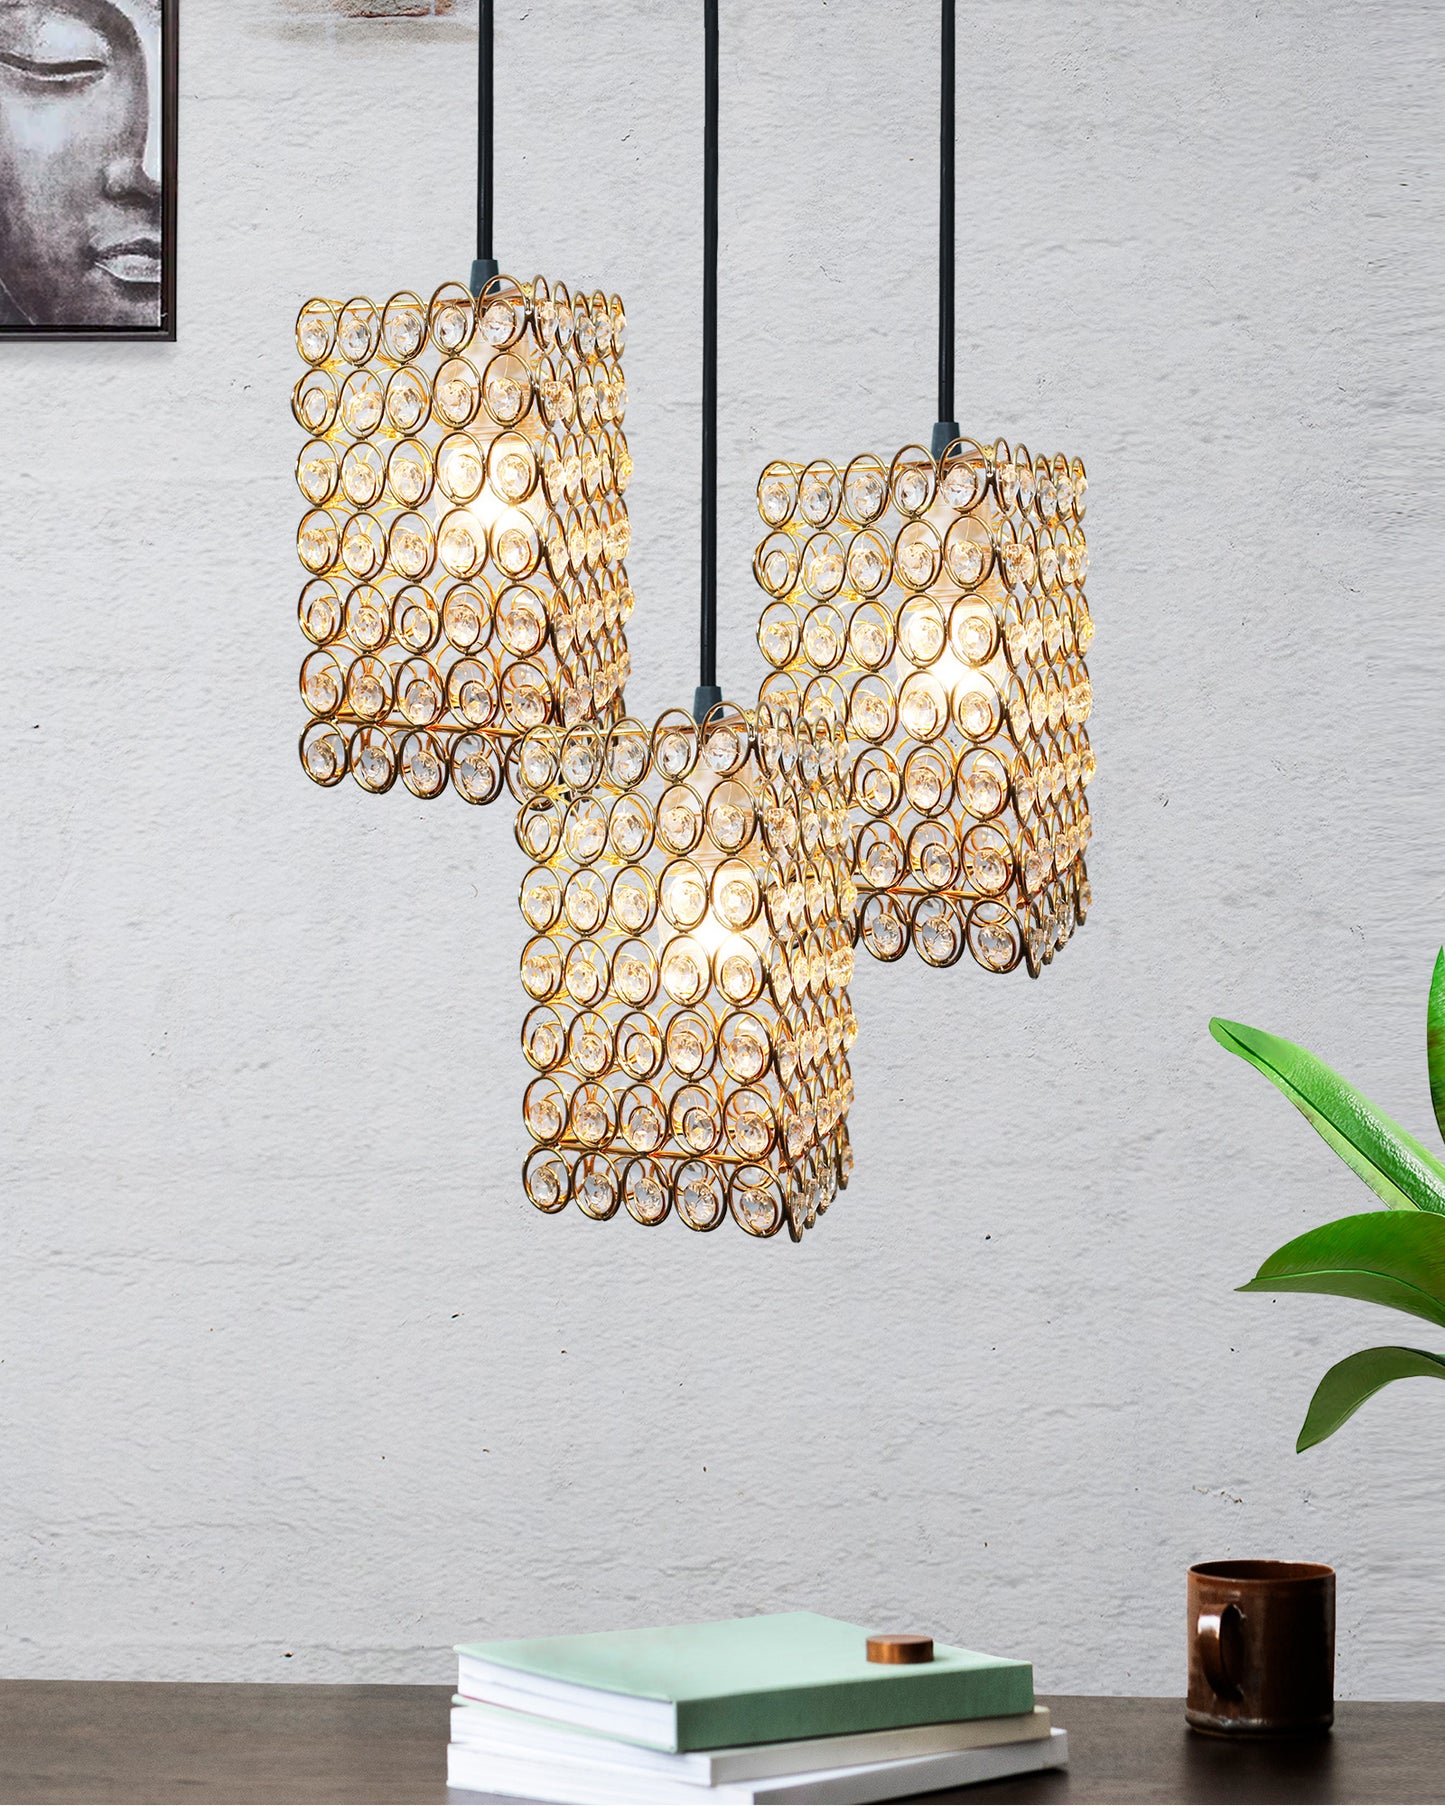 3-lights Round Cluster Chandelier Crystal hanging Pendant Light Golden, Dual Ring Triangle